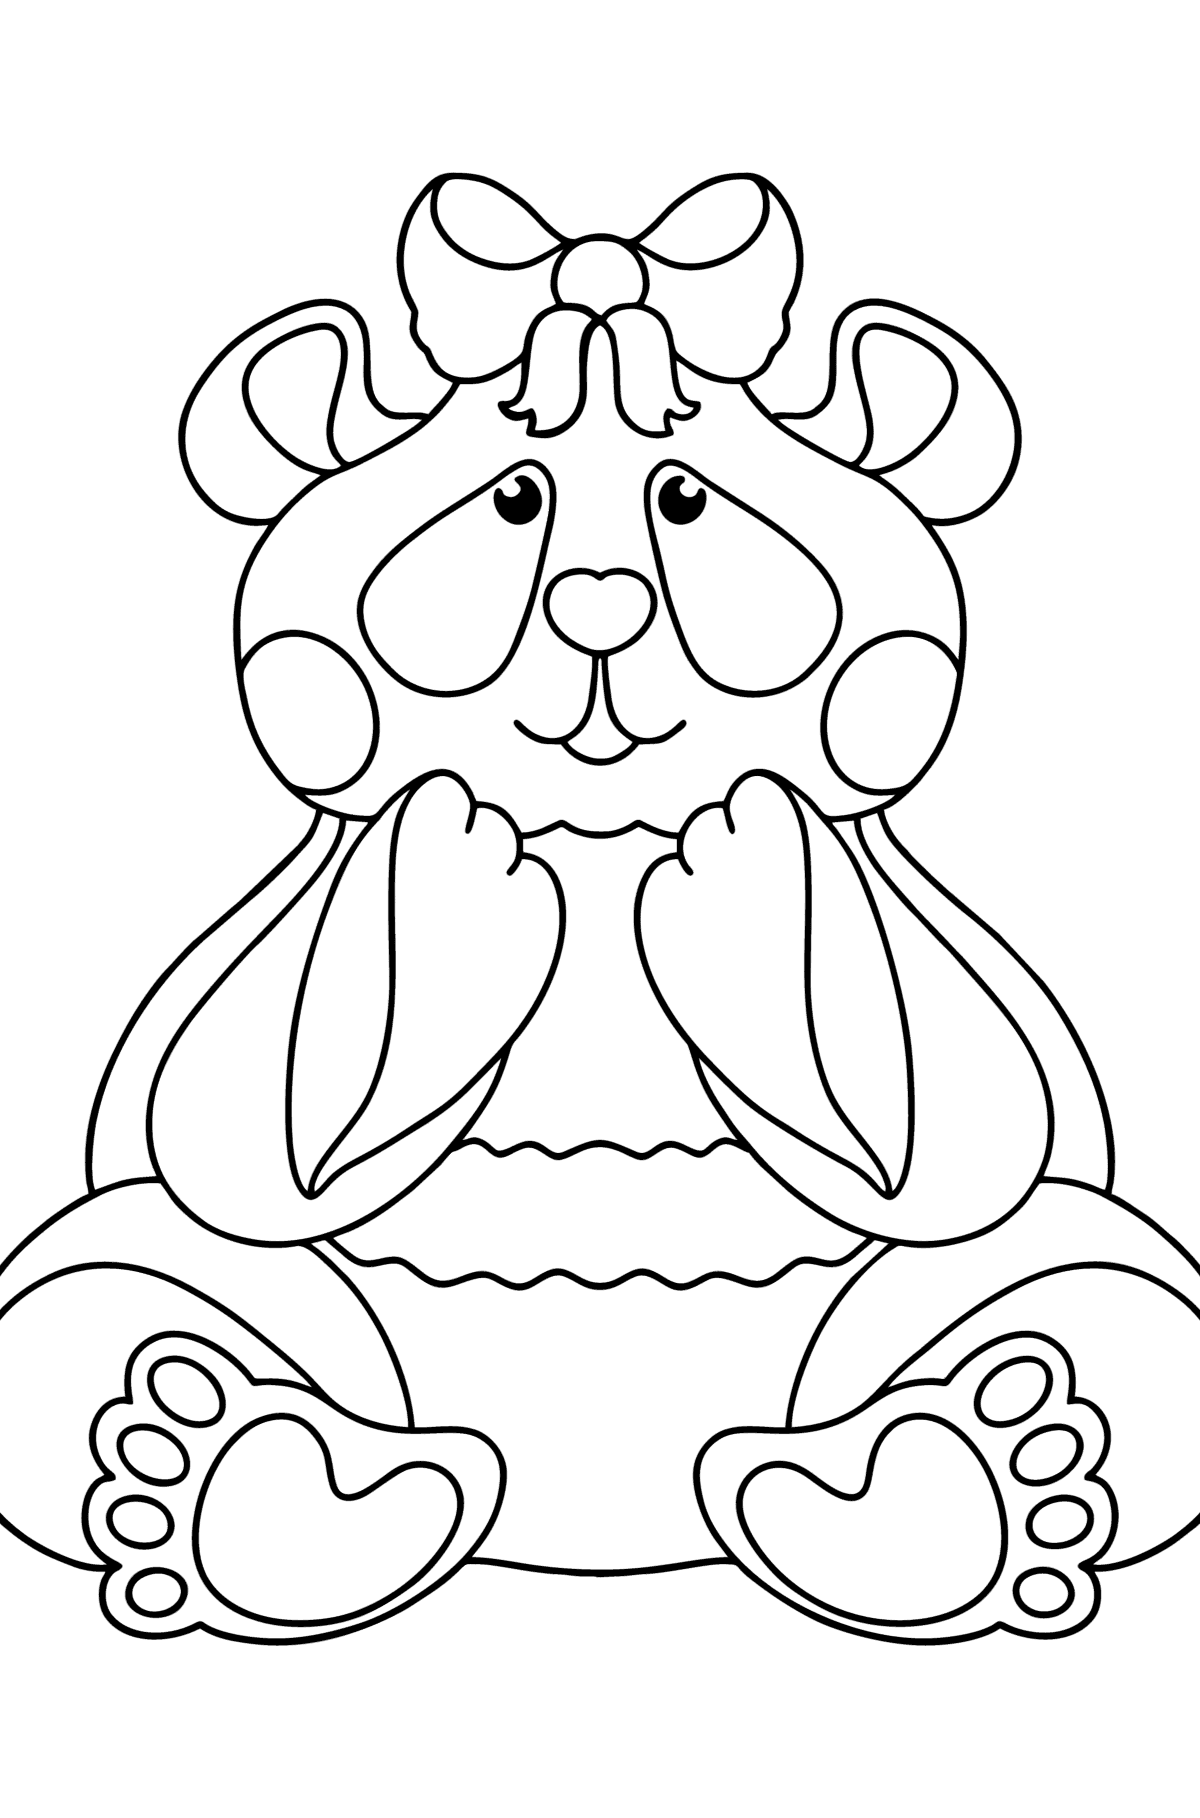 Panda baby coloring page - Coloring Pages for Kids